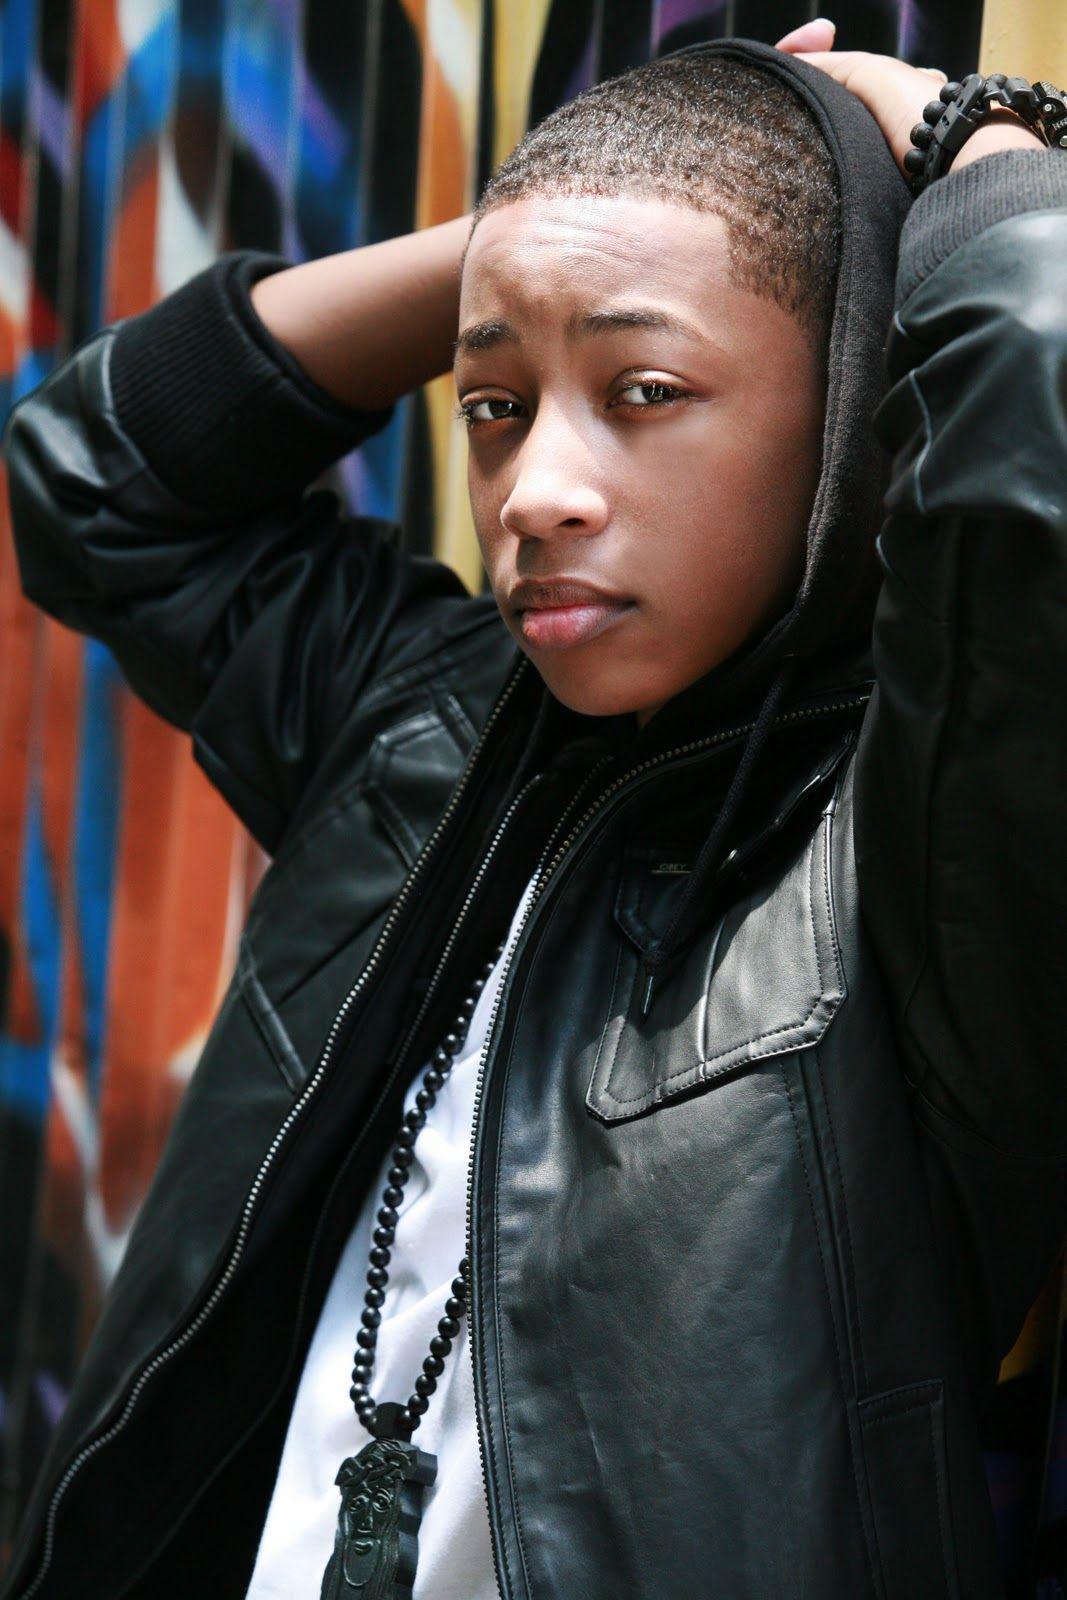 Jacob Latimore lovers image cutie pie HD wallpaper and background